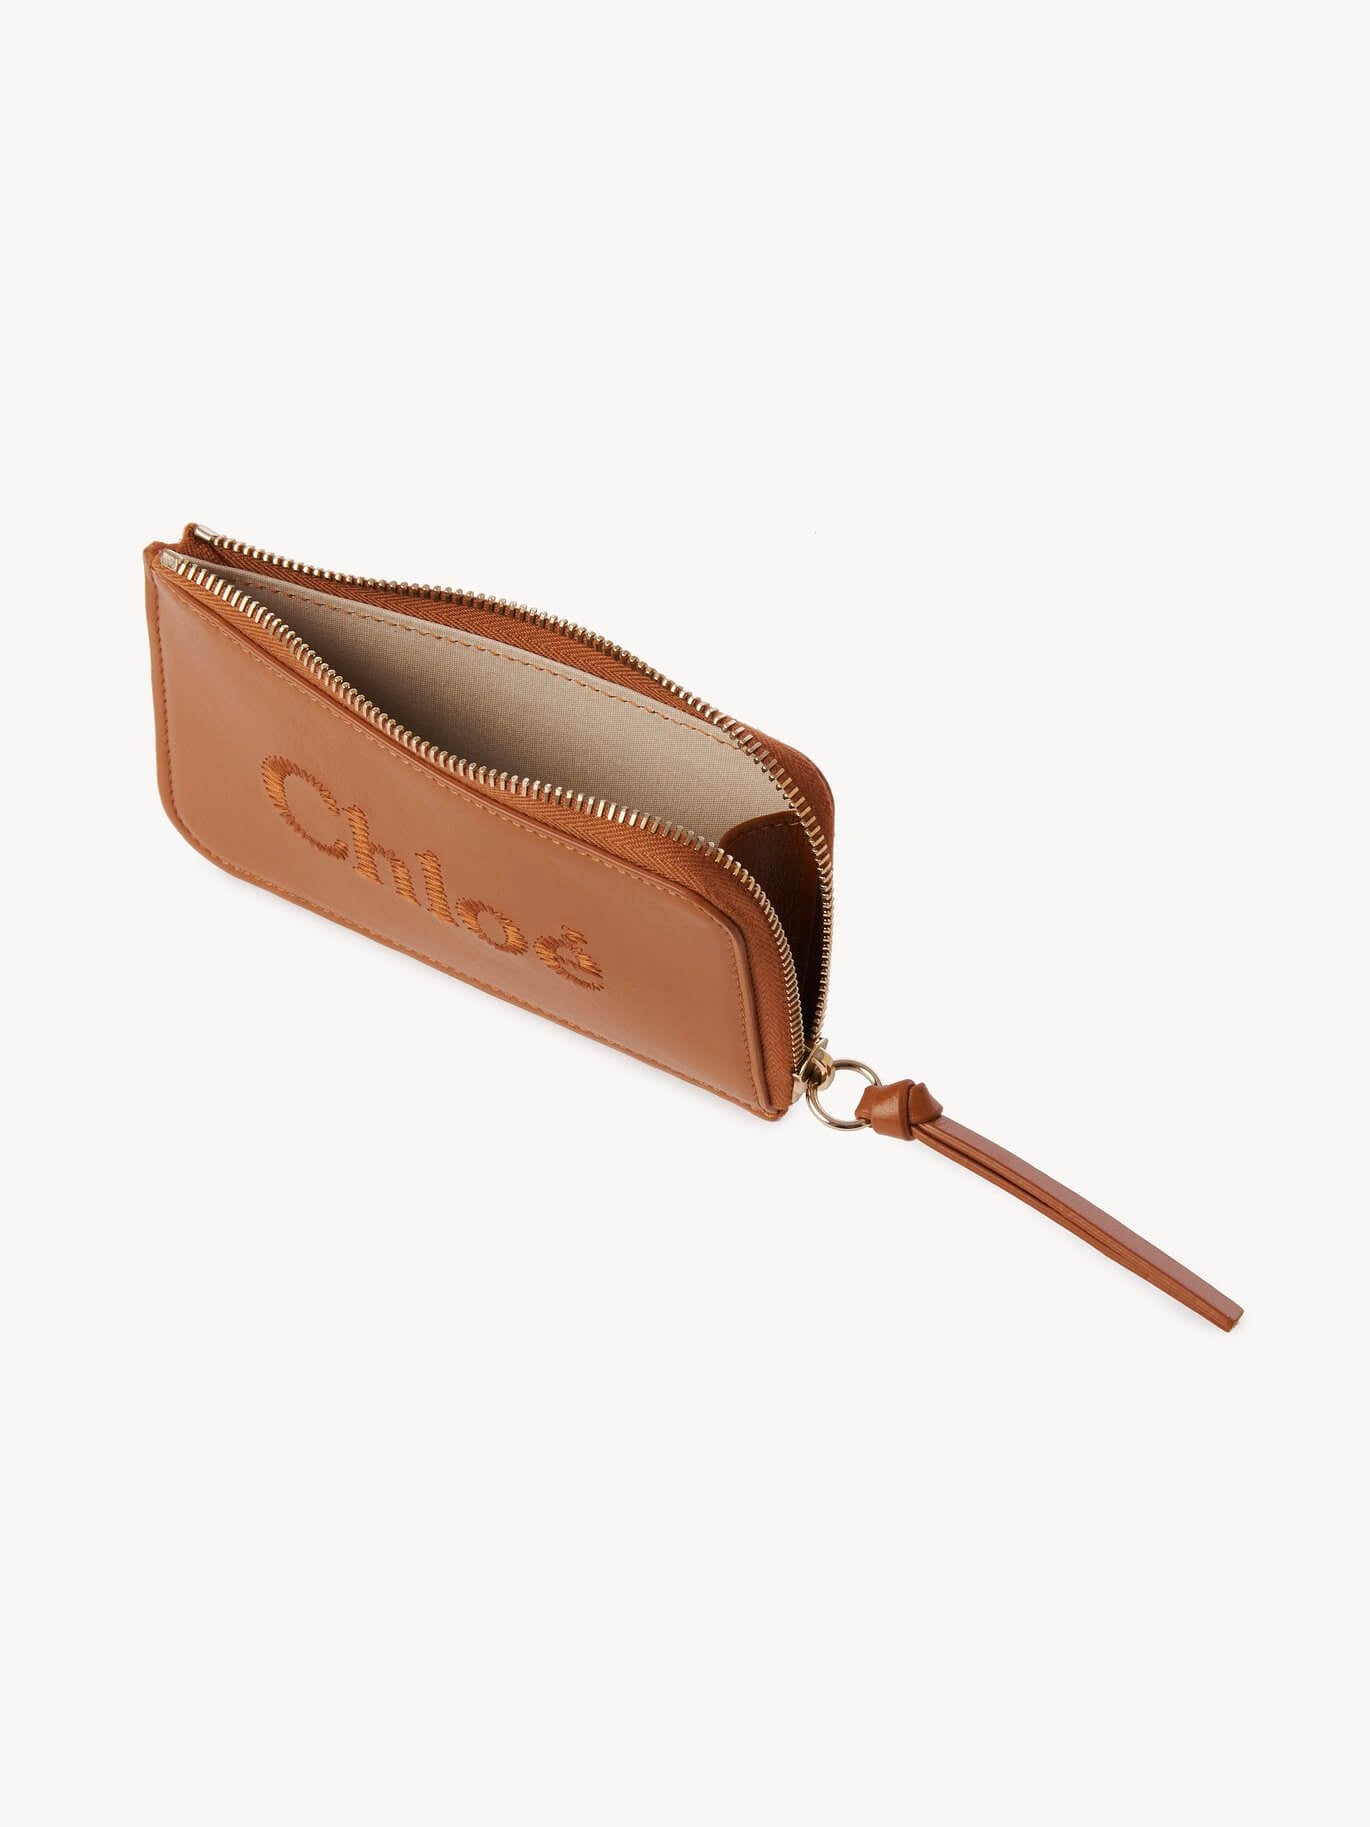 Chloe Sense Small Purse With Card Slots in Caramel available at The New Trend